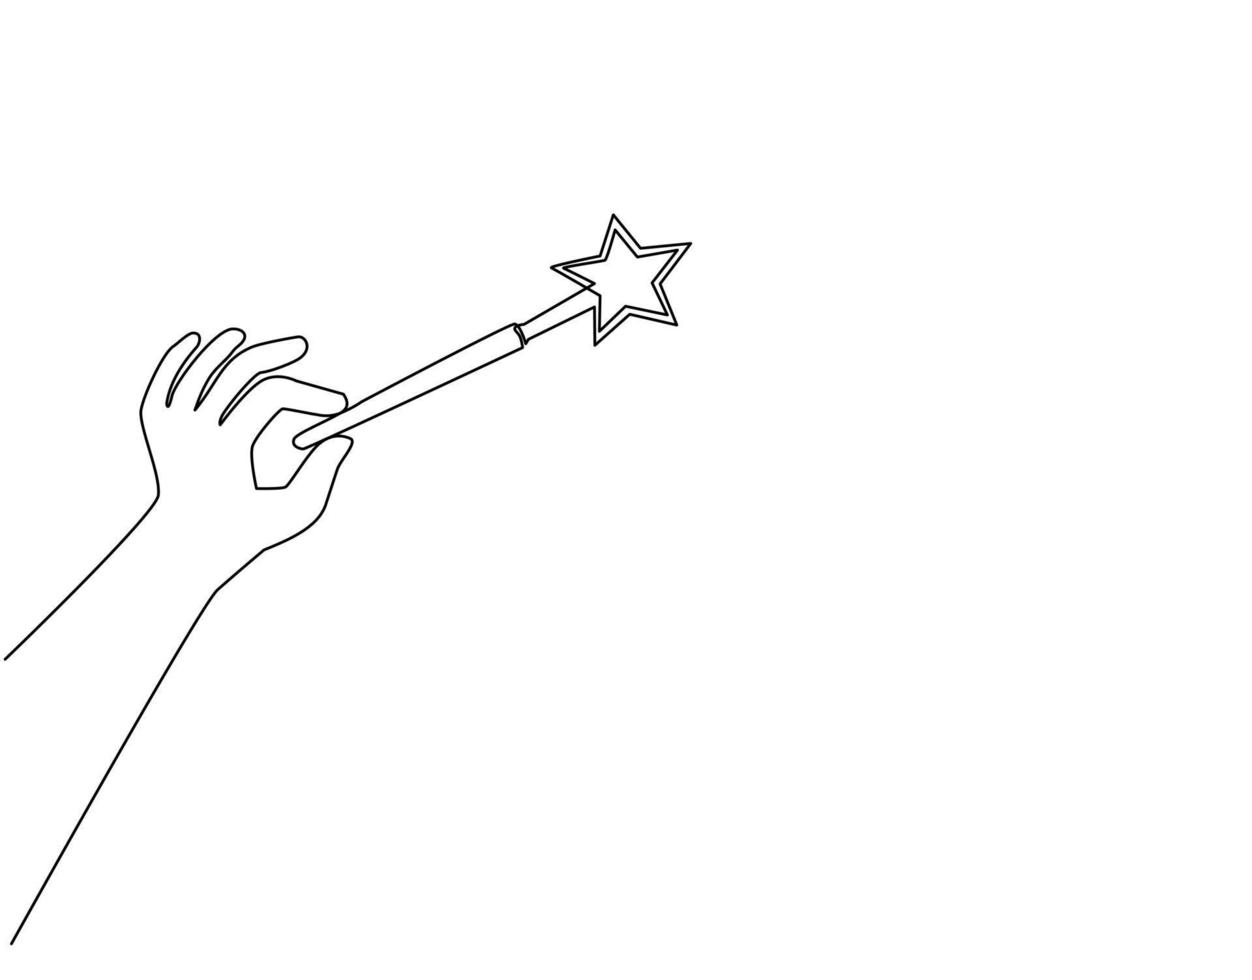 Single one line drawing hand holding magic wand. Decorative magic wand with magic trace. Star shape magic accessory. Magical girl cartoon power. Continuous line draw design graphic vector illustration